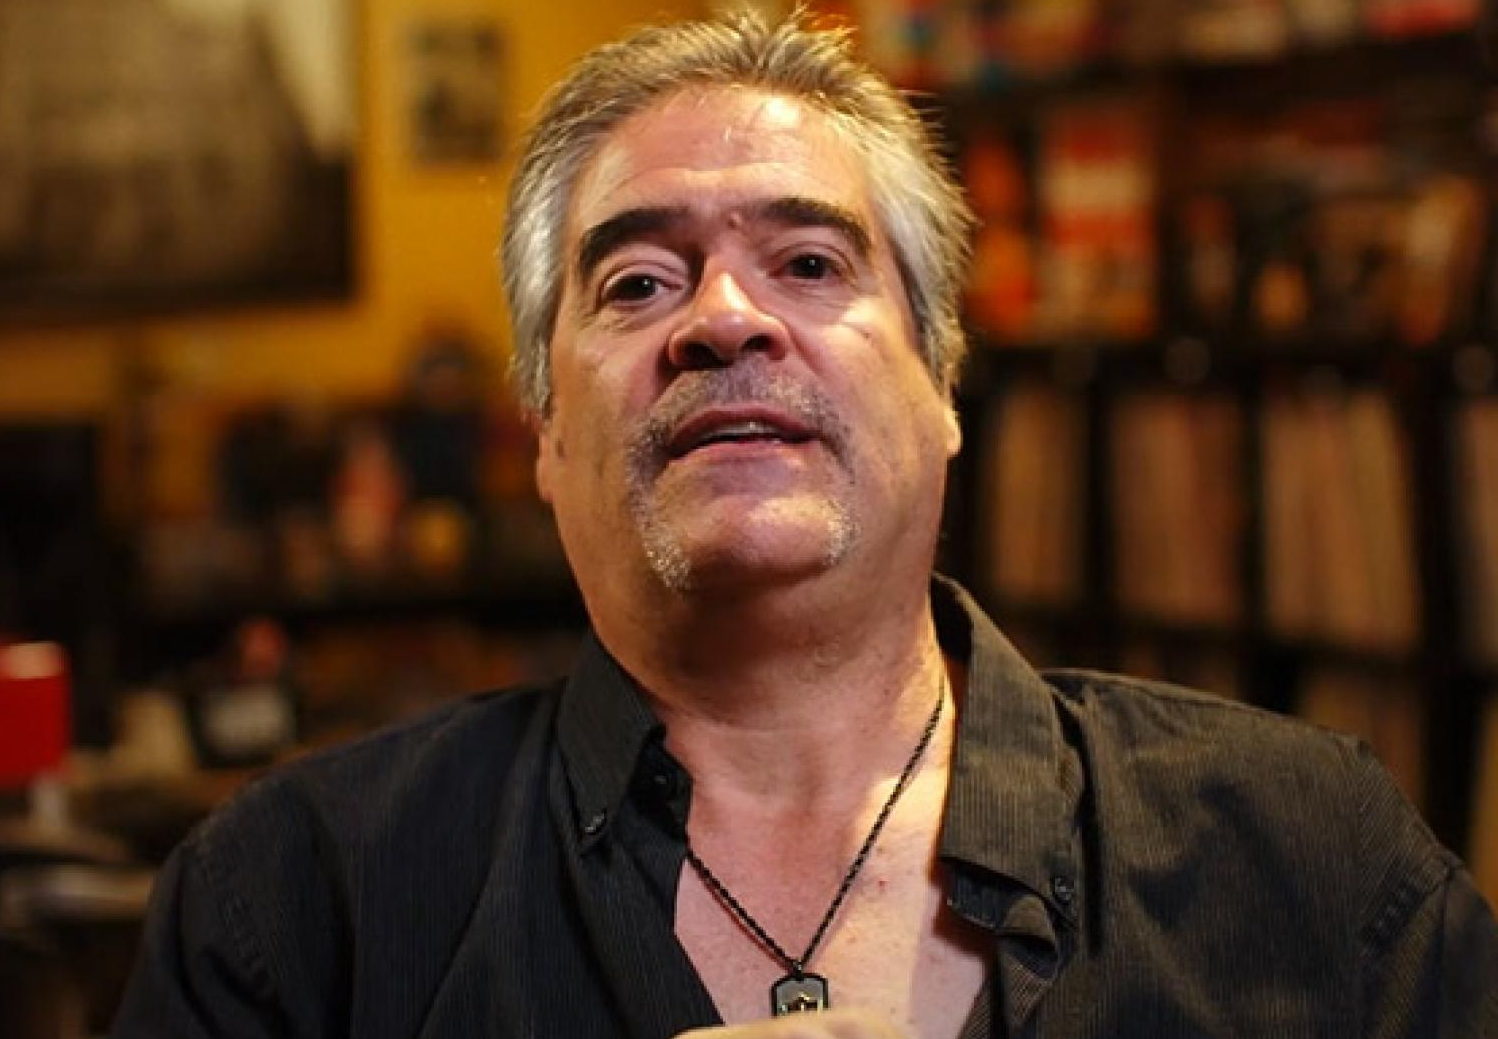 Kevin Nash Suggests AEW Should Consider Giving Vince Russo an Opportunity